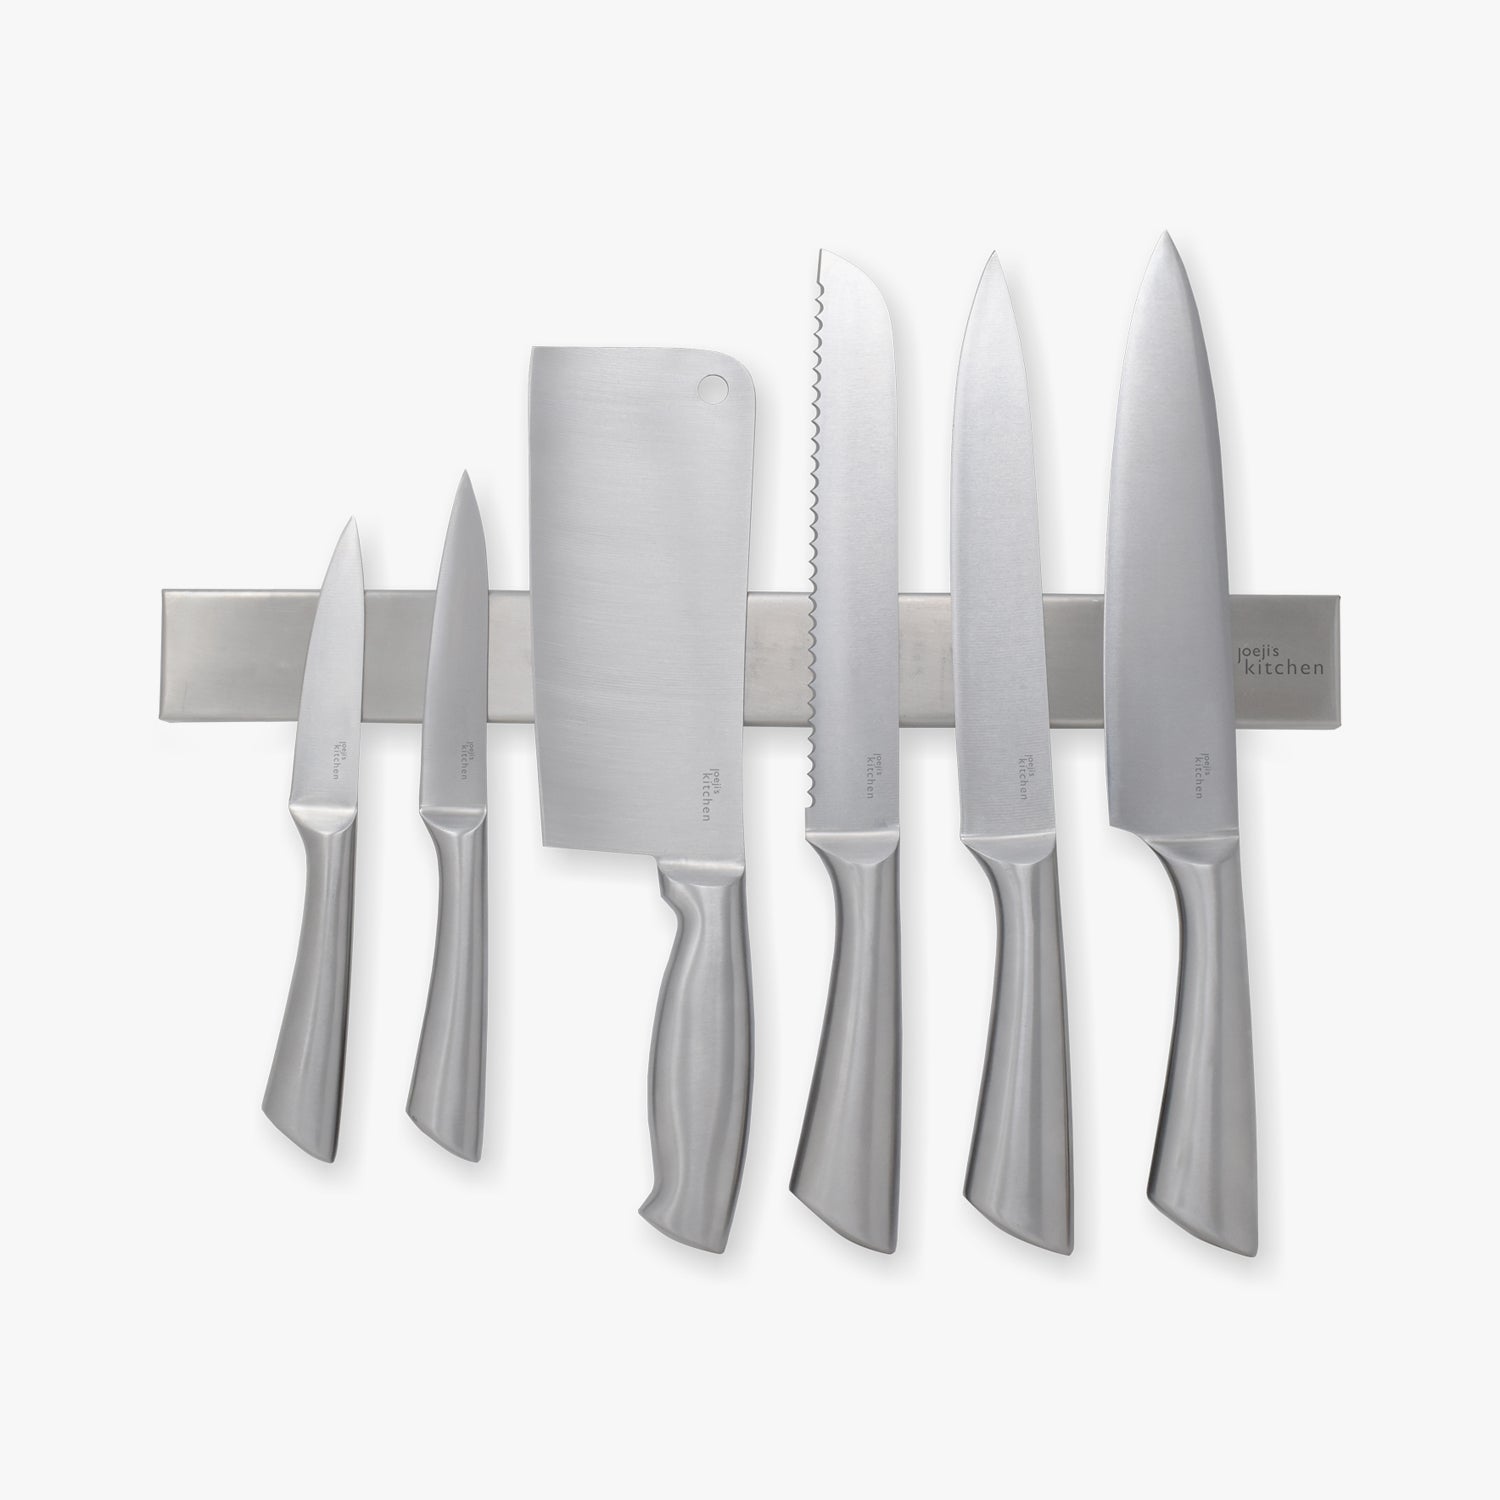 Stainless Steel Magnetic Knife Bar